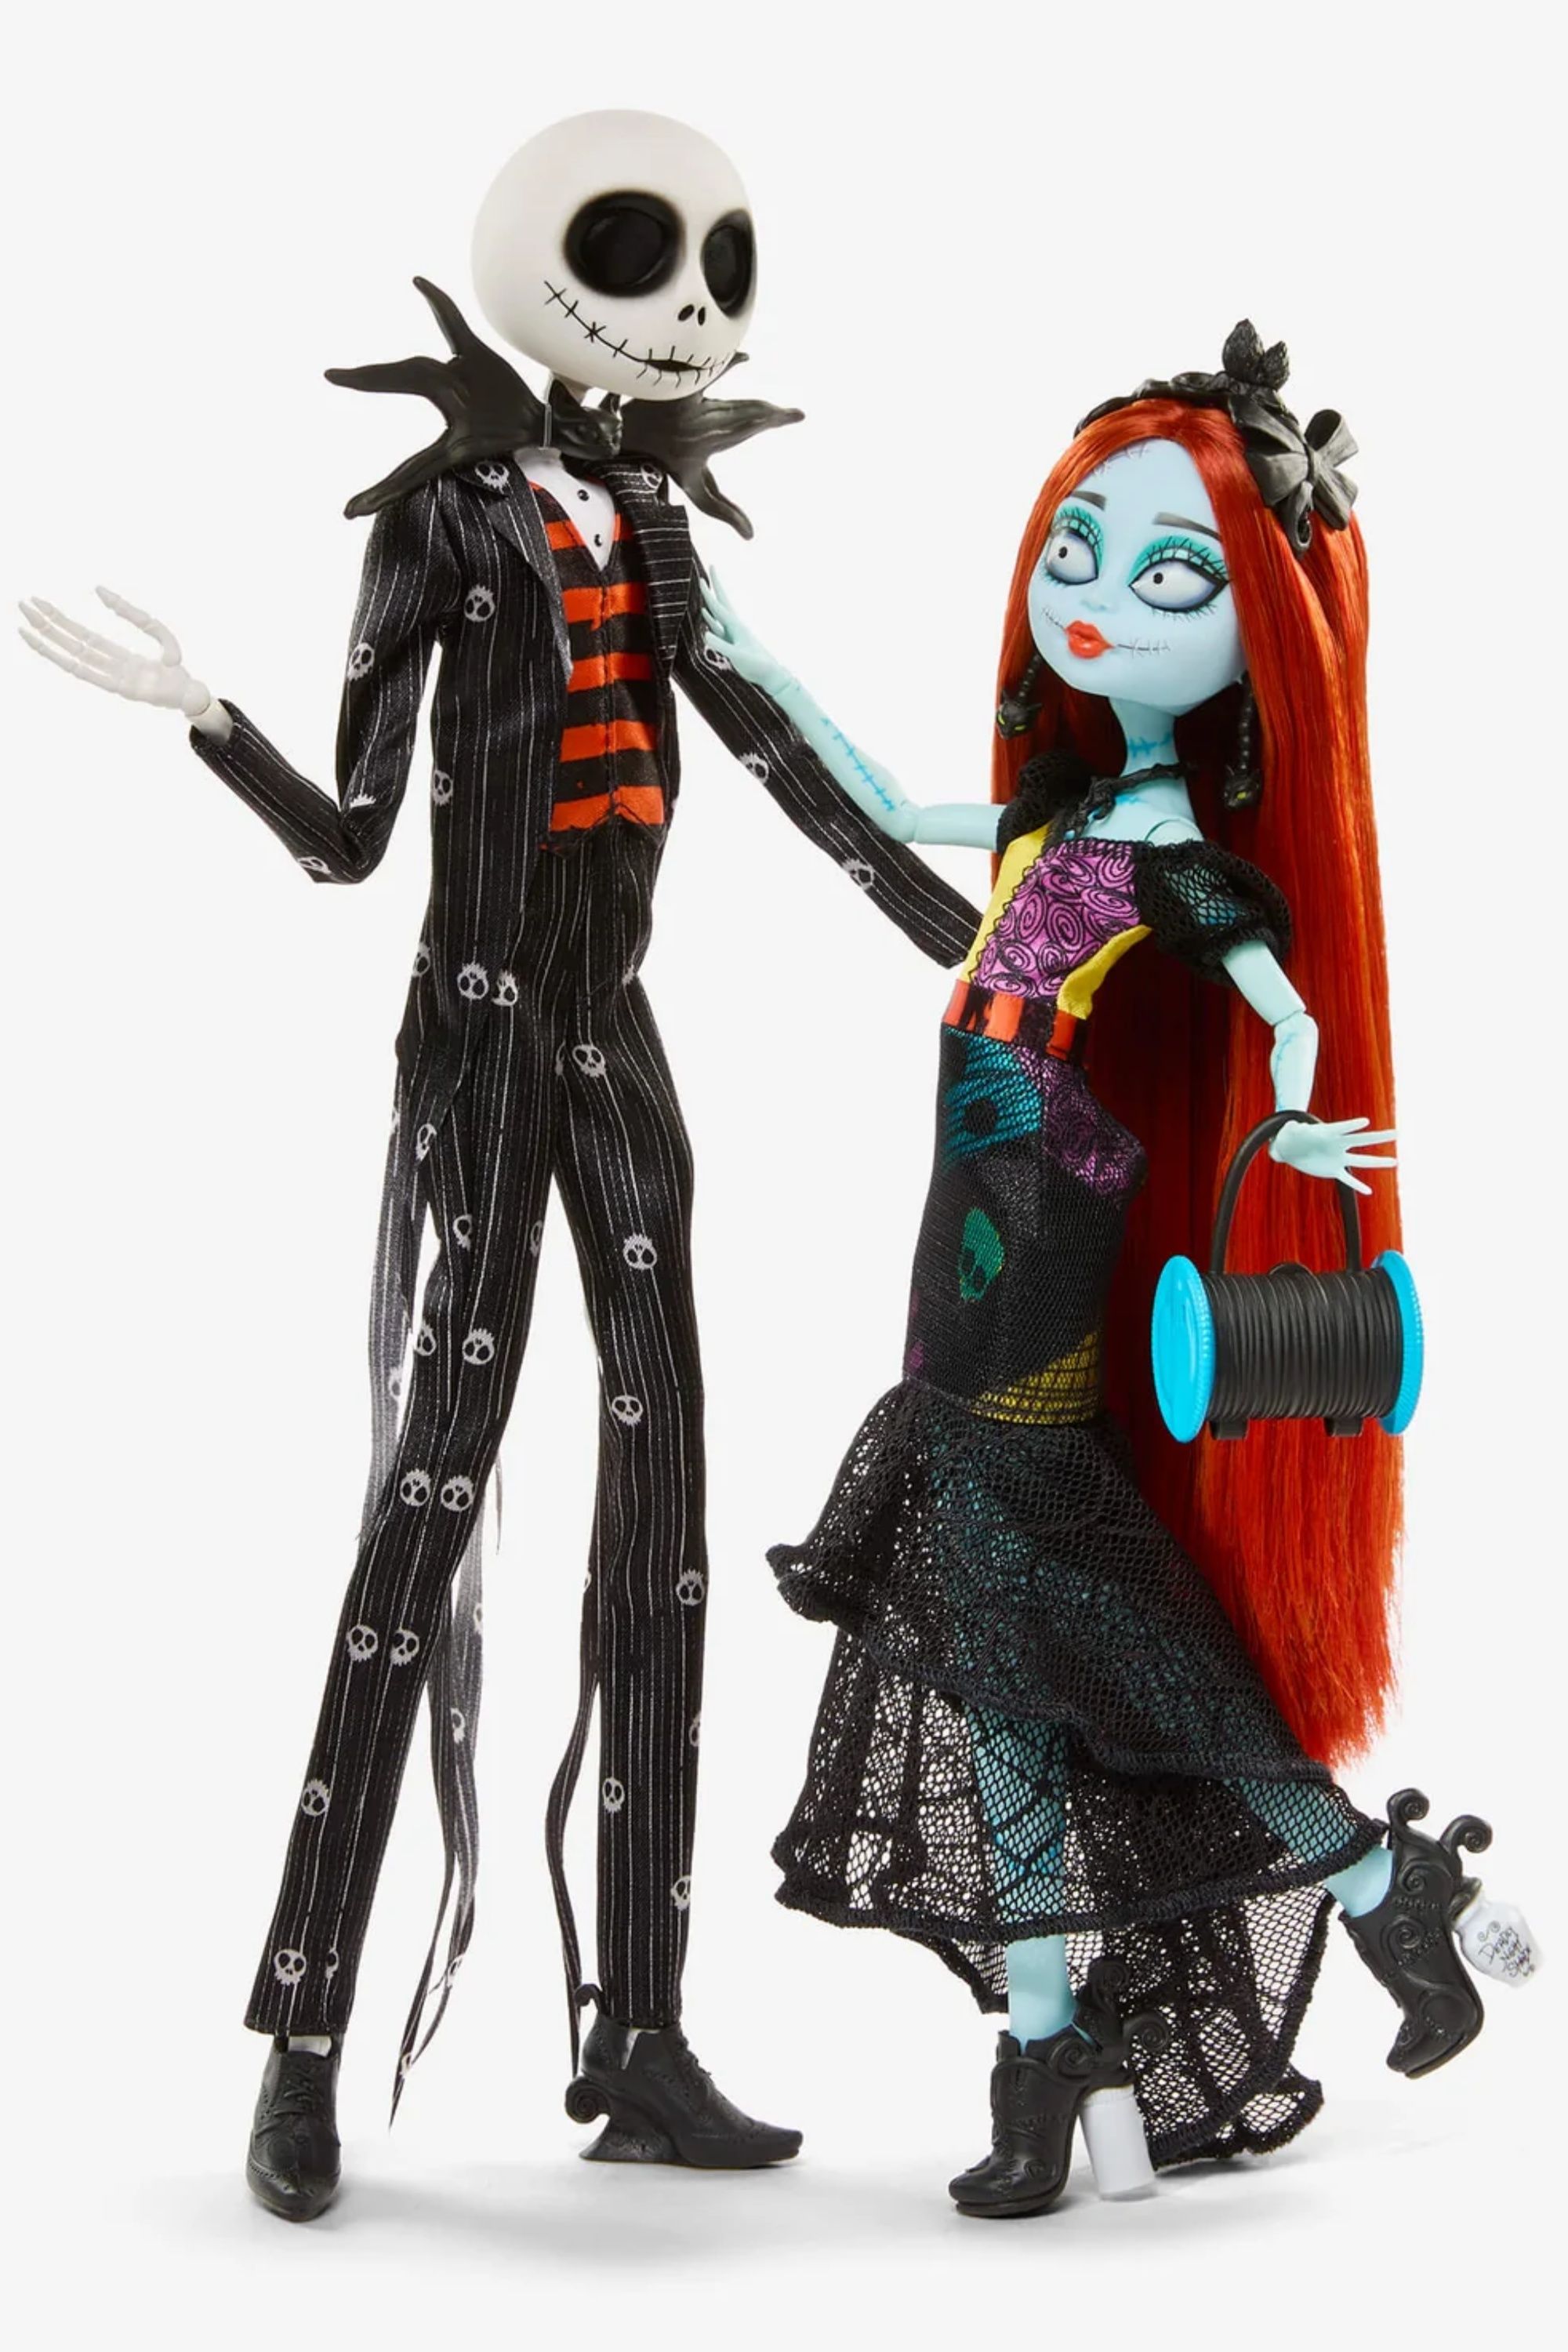 Monster High Skullector The Nightmare Before Christmas Dolls Now Available